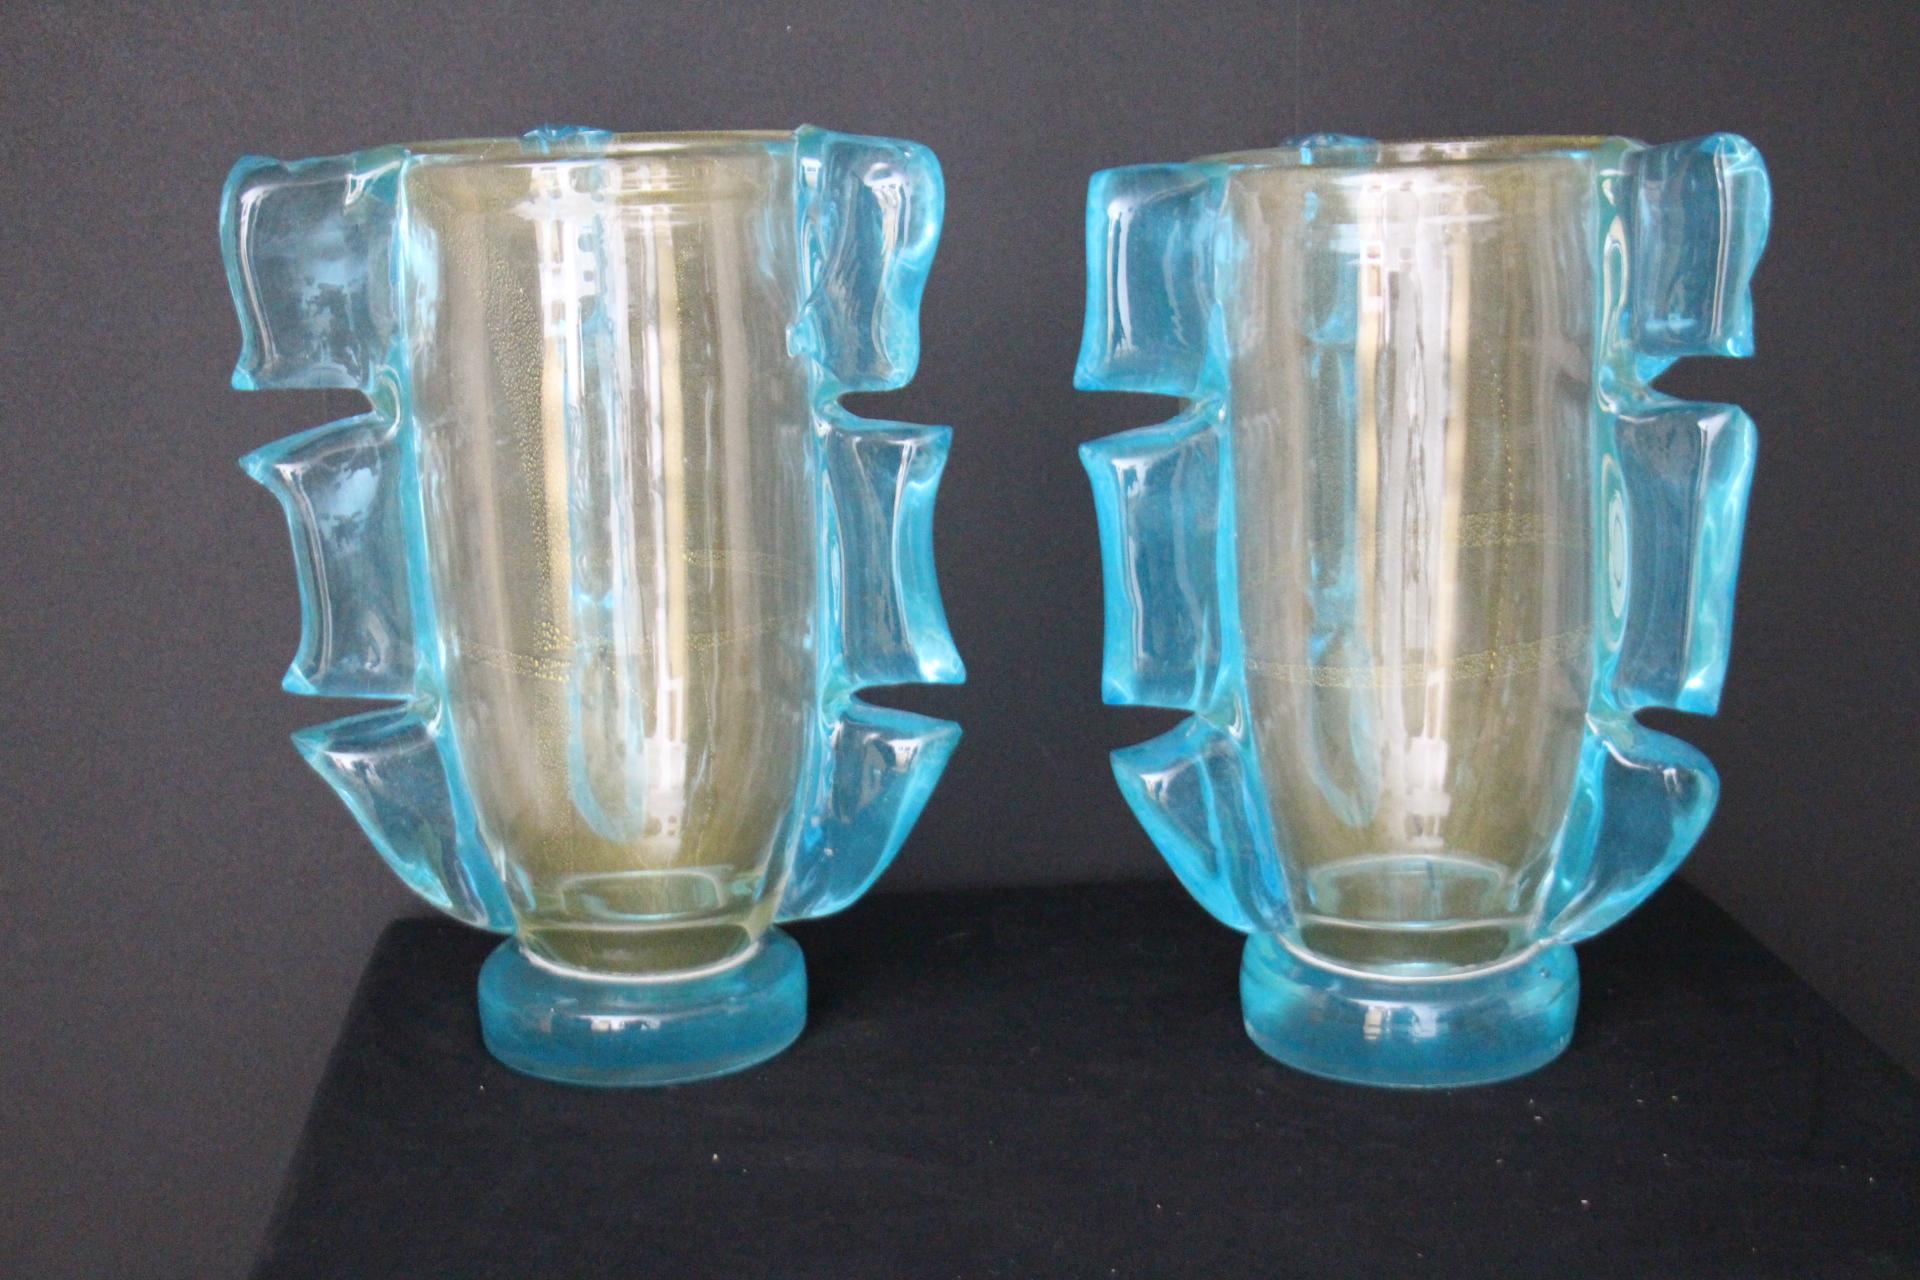 Pair of Large Golden And Turquoise Blue Murano Glass Vases by Costantini For Sale 1